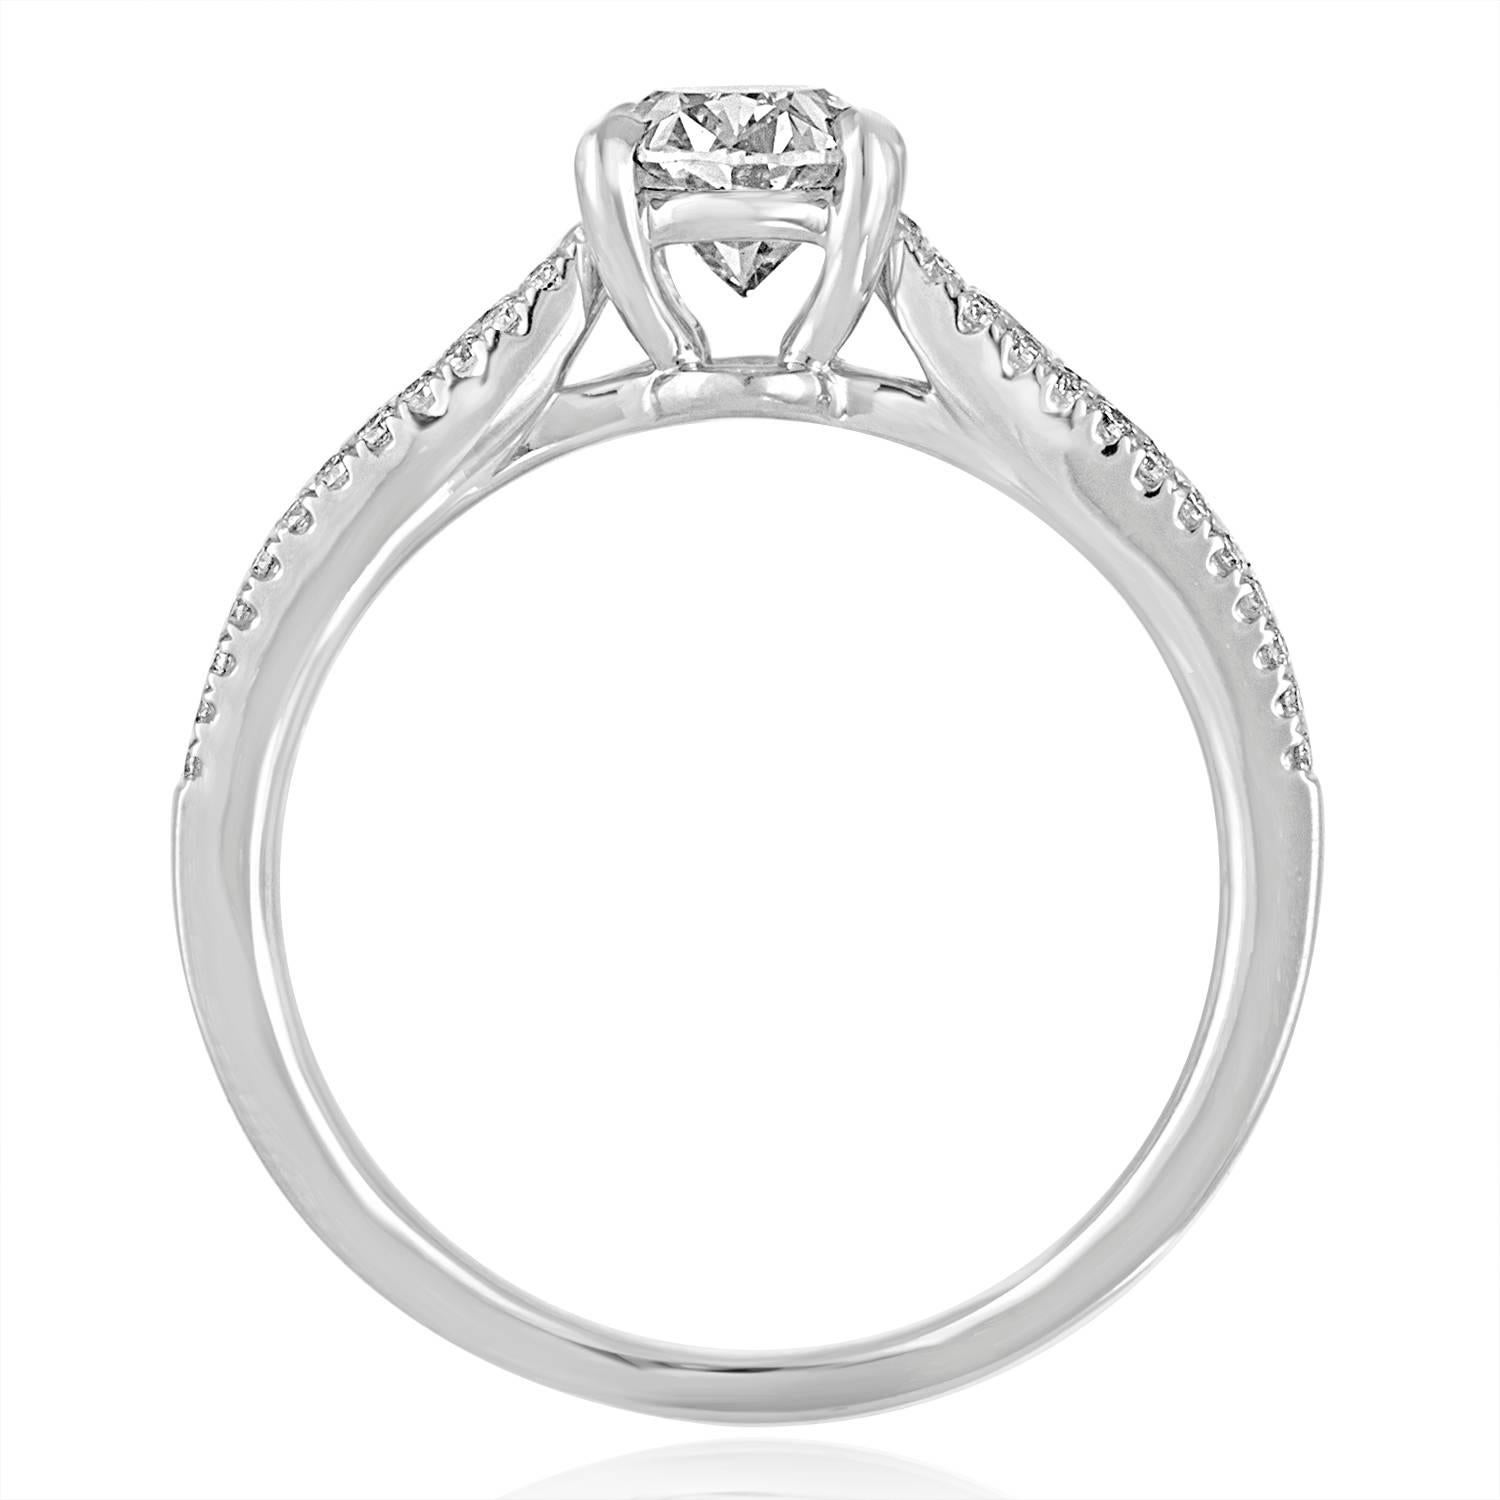 Beautiful Oval Engagement Ring
The ring is 18K White Gold
The center stone is an Oval 1.03 Carats D VS2 GIA Certified
The setting has 0.73 Carats in White Diamonds F/G VS/SI
The ring is a size 6.75, sizable.
The ring weighs 4.2 grams.